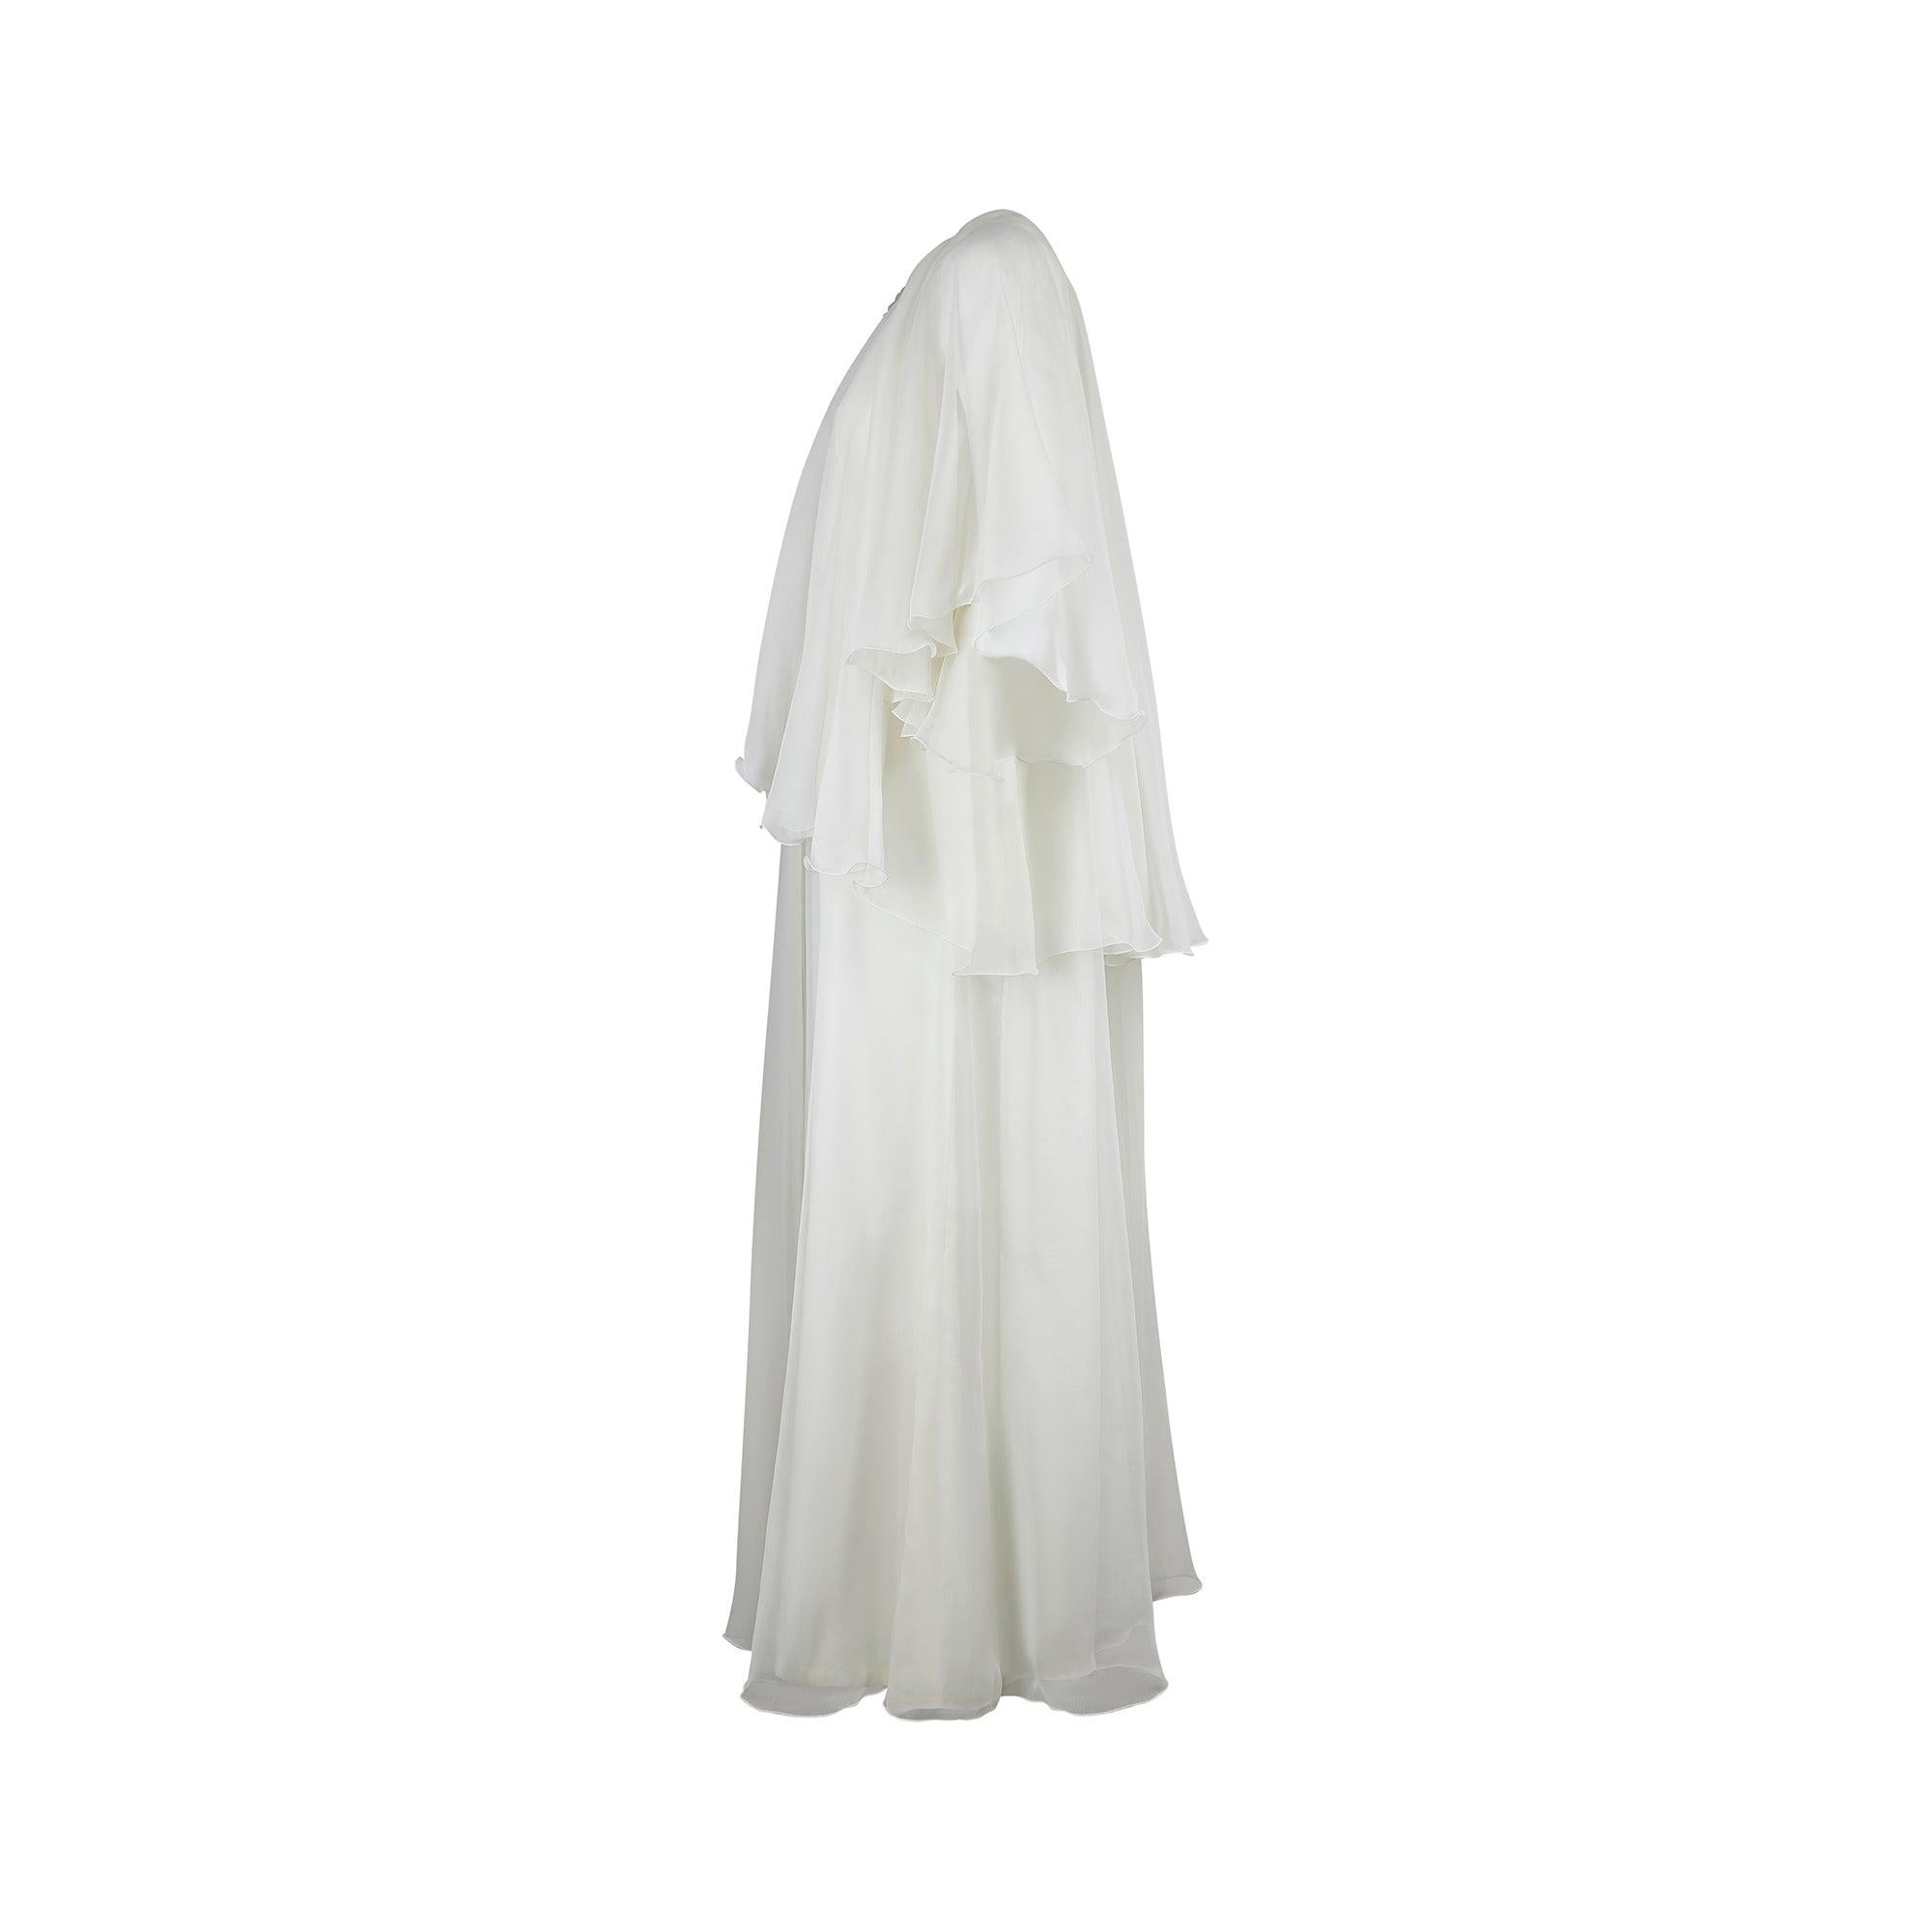 This ethereal wedding dress dates from the mid 1970s, with its tiered construction, caped shoulders and layers of frothy pale cream georgette. The skirt is formed from a cream acetate lining topped with a sheer layer of polyester georgette. An